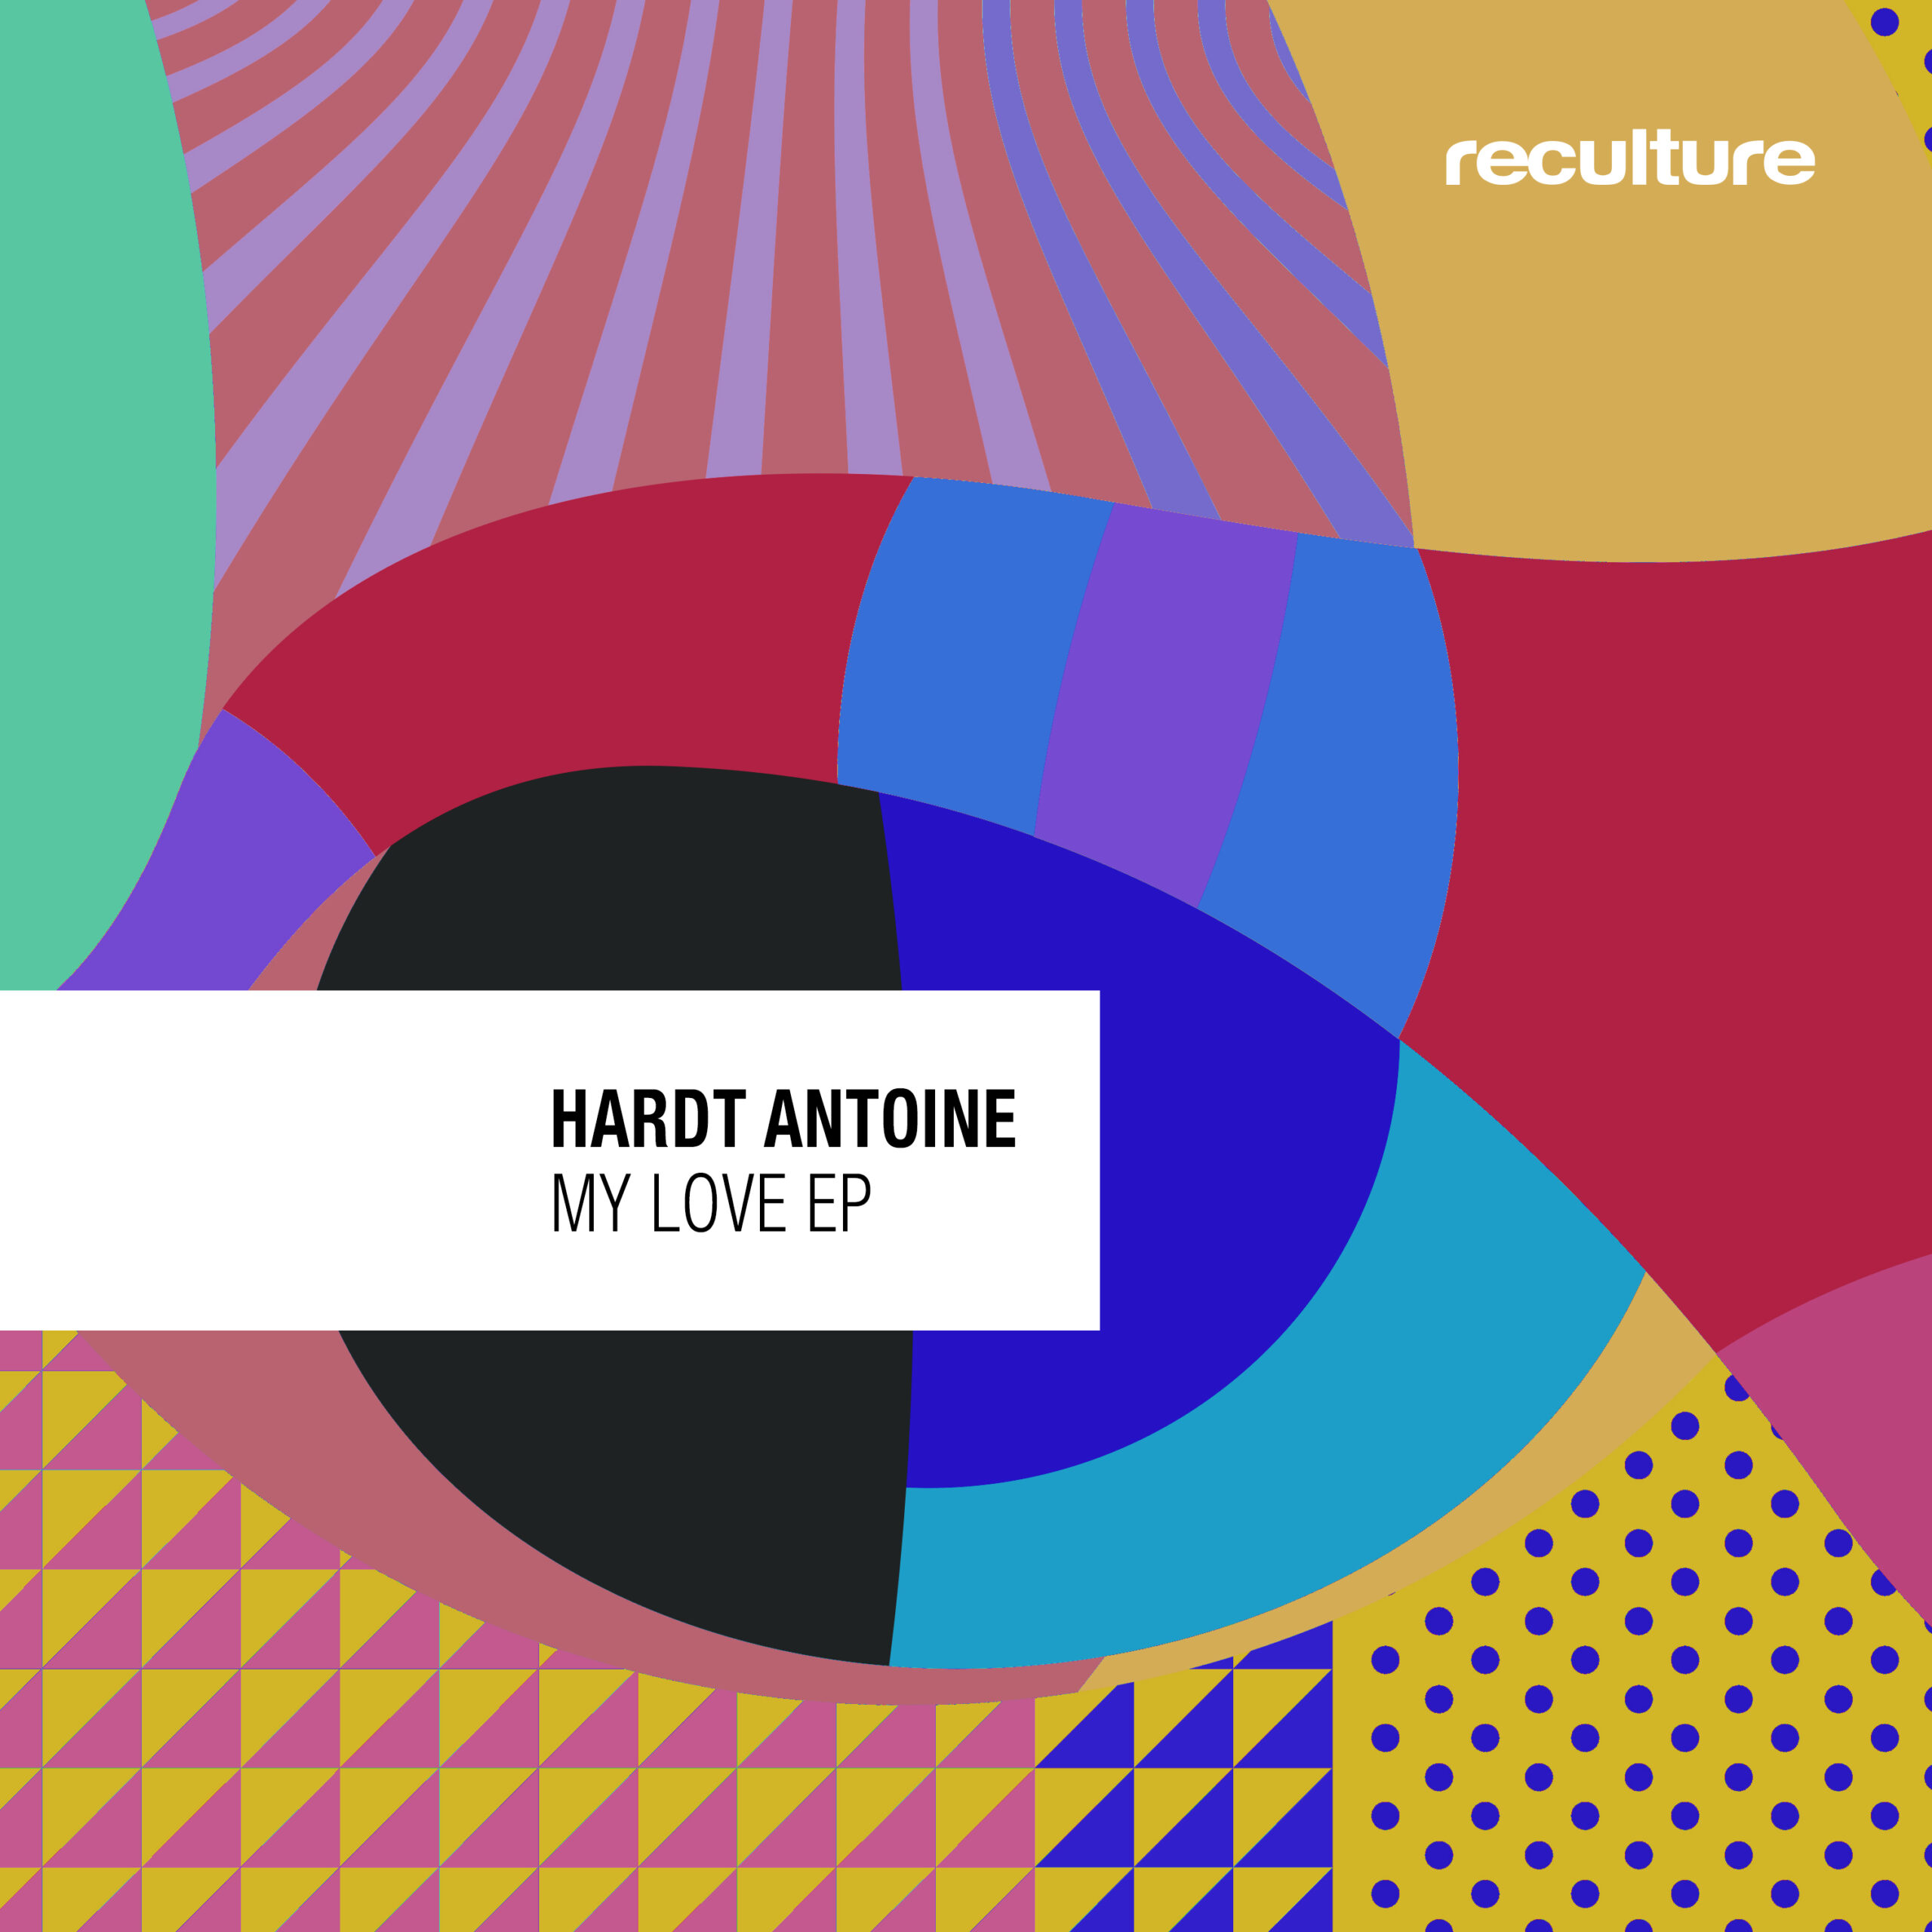 Hardt Antoine gives melodic masterclass on new EP My Love